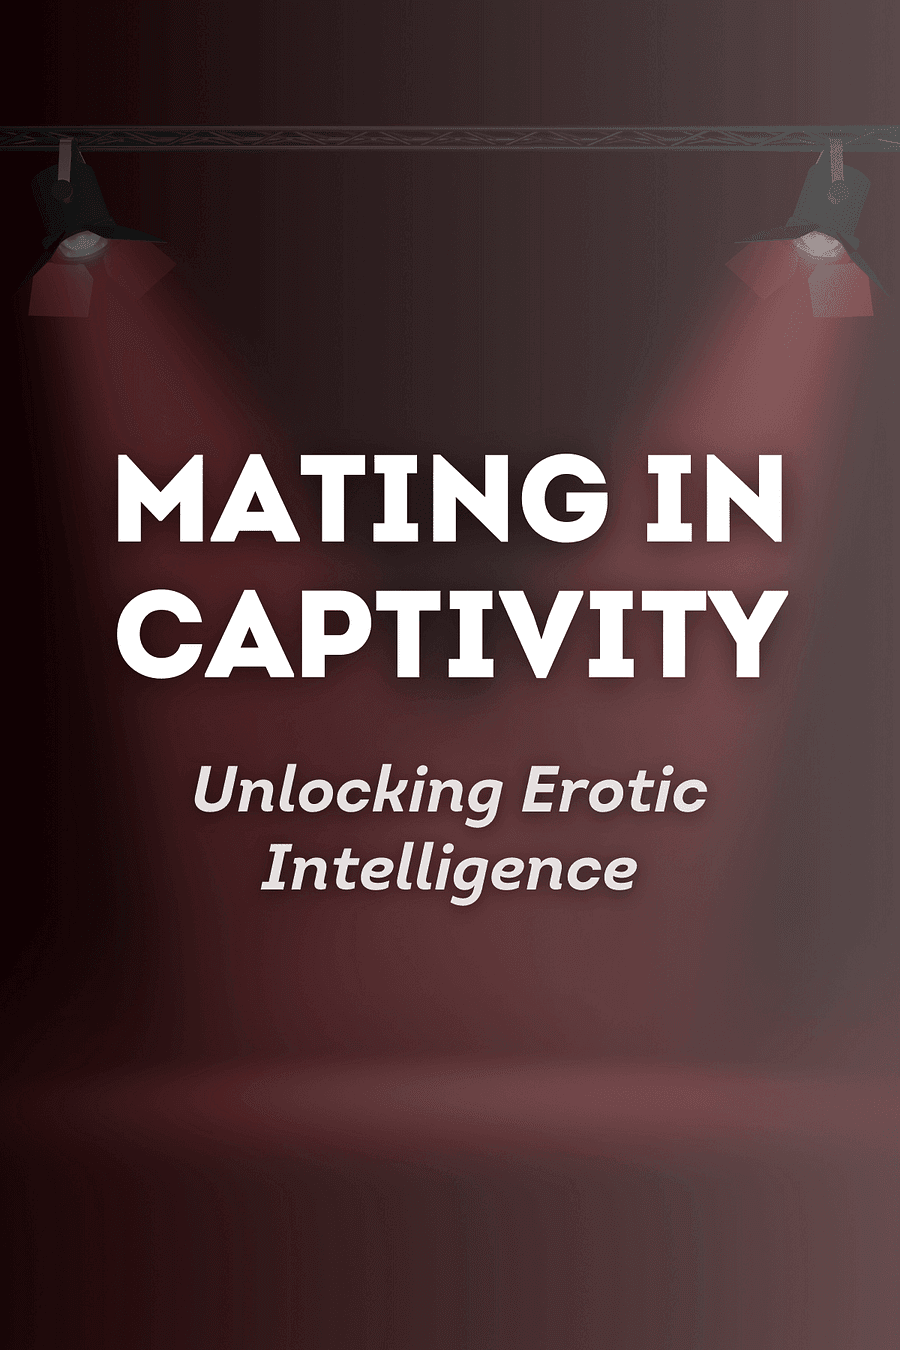 Mating in Captivity by Esther Perel - Book Summary